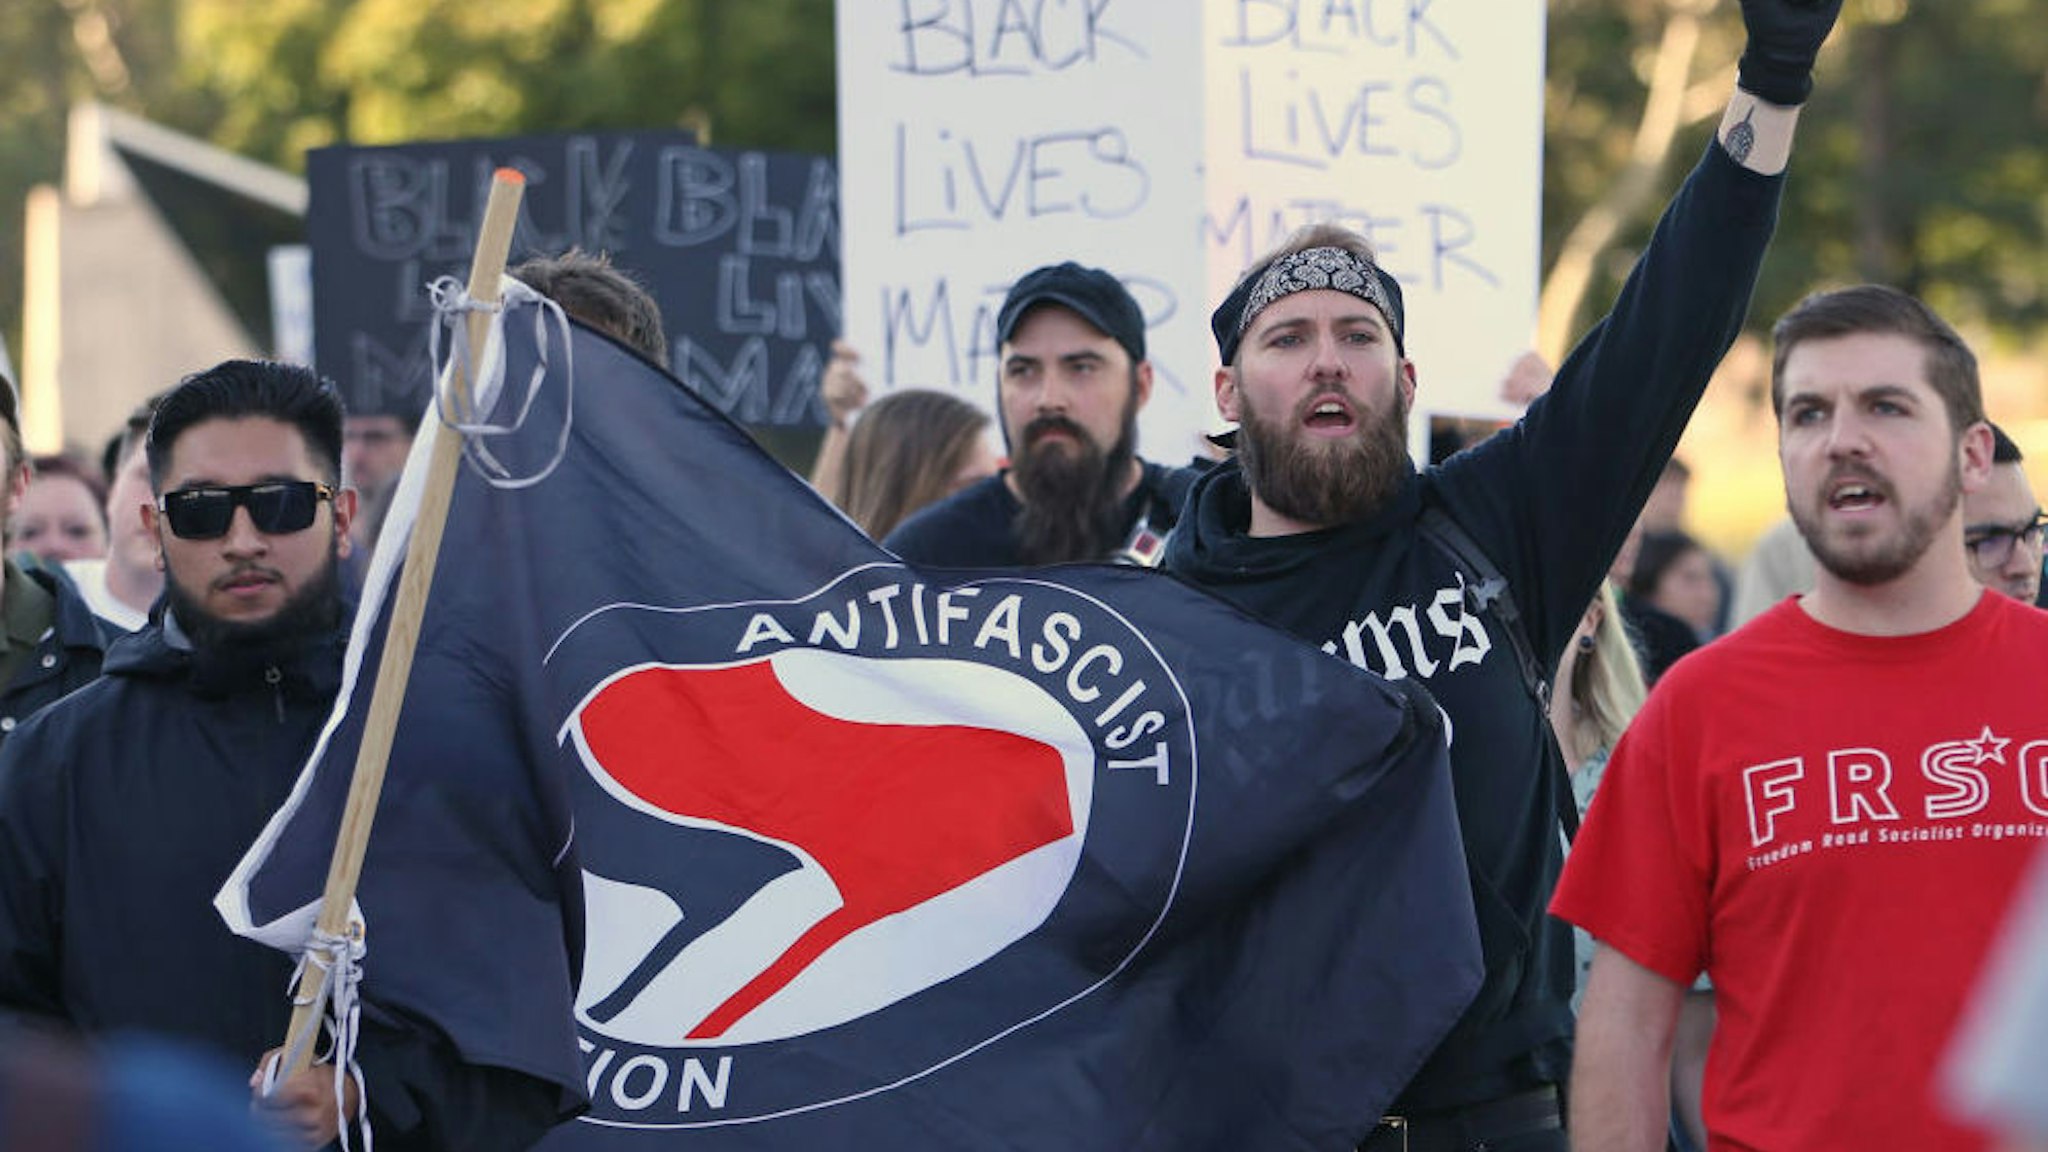 SALT LAKE CITY, UT - SEPTEMBER 27: ANTIFA protesters demonstrate on the University of Utah campus against an event where right wing writer and commentator Ben Shapiro is speaking on September 27, 2017 in Salt Lake City, Utah. Campus authorities have increased security ahead of the appearance by Shapiro, Editor in chief of The Daily Wire.